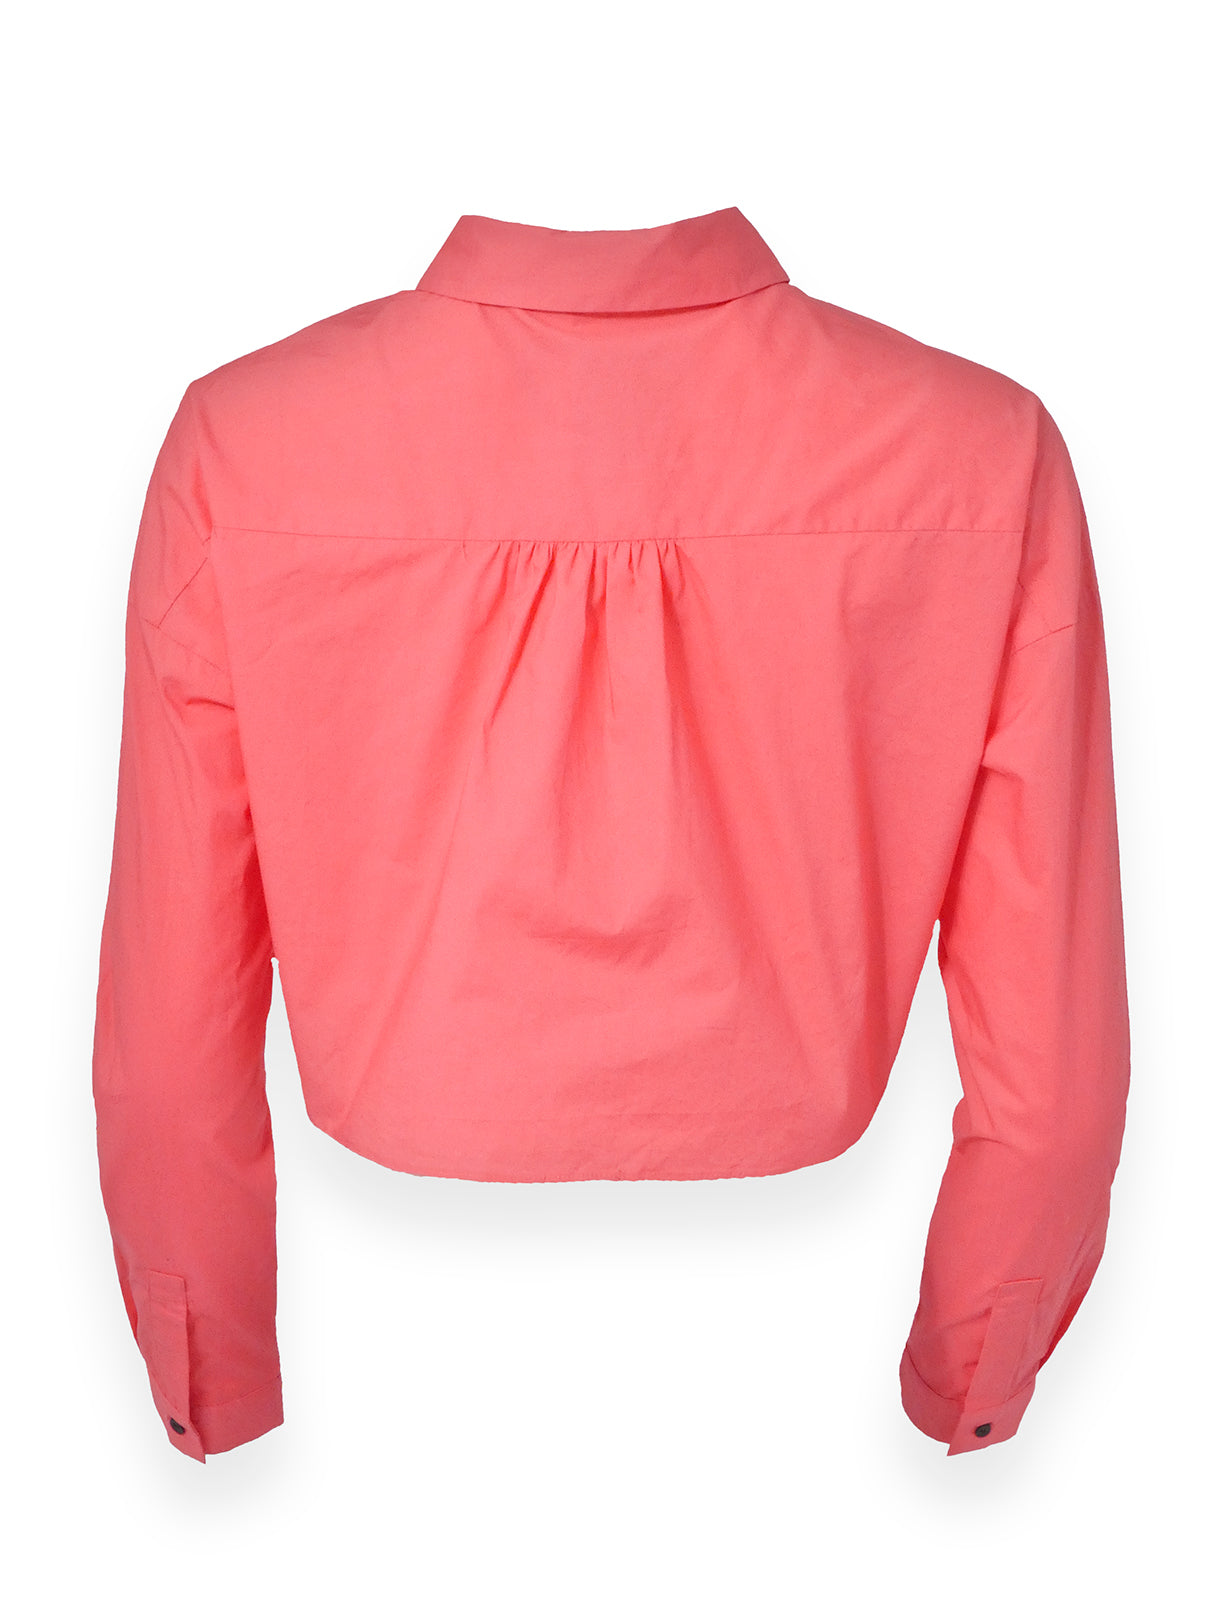 Hot Pink Tie Up Cropped Shirt